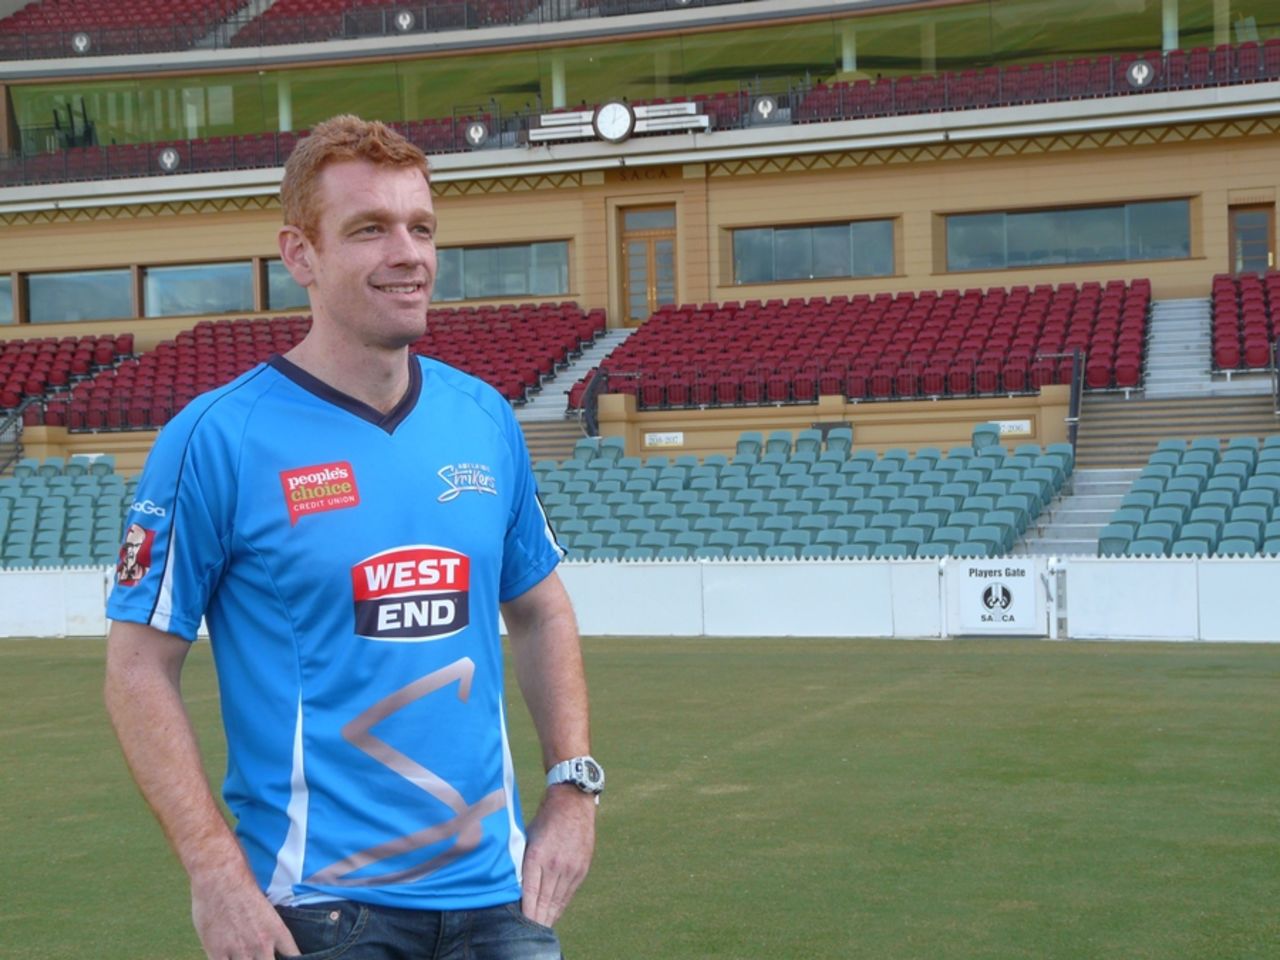 Andrew McDonald in his new Adelaide Strikers outfit, July 16, 2012